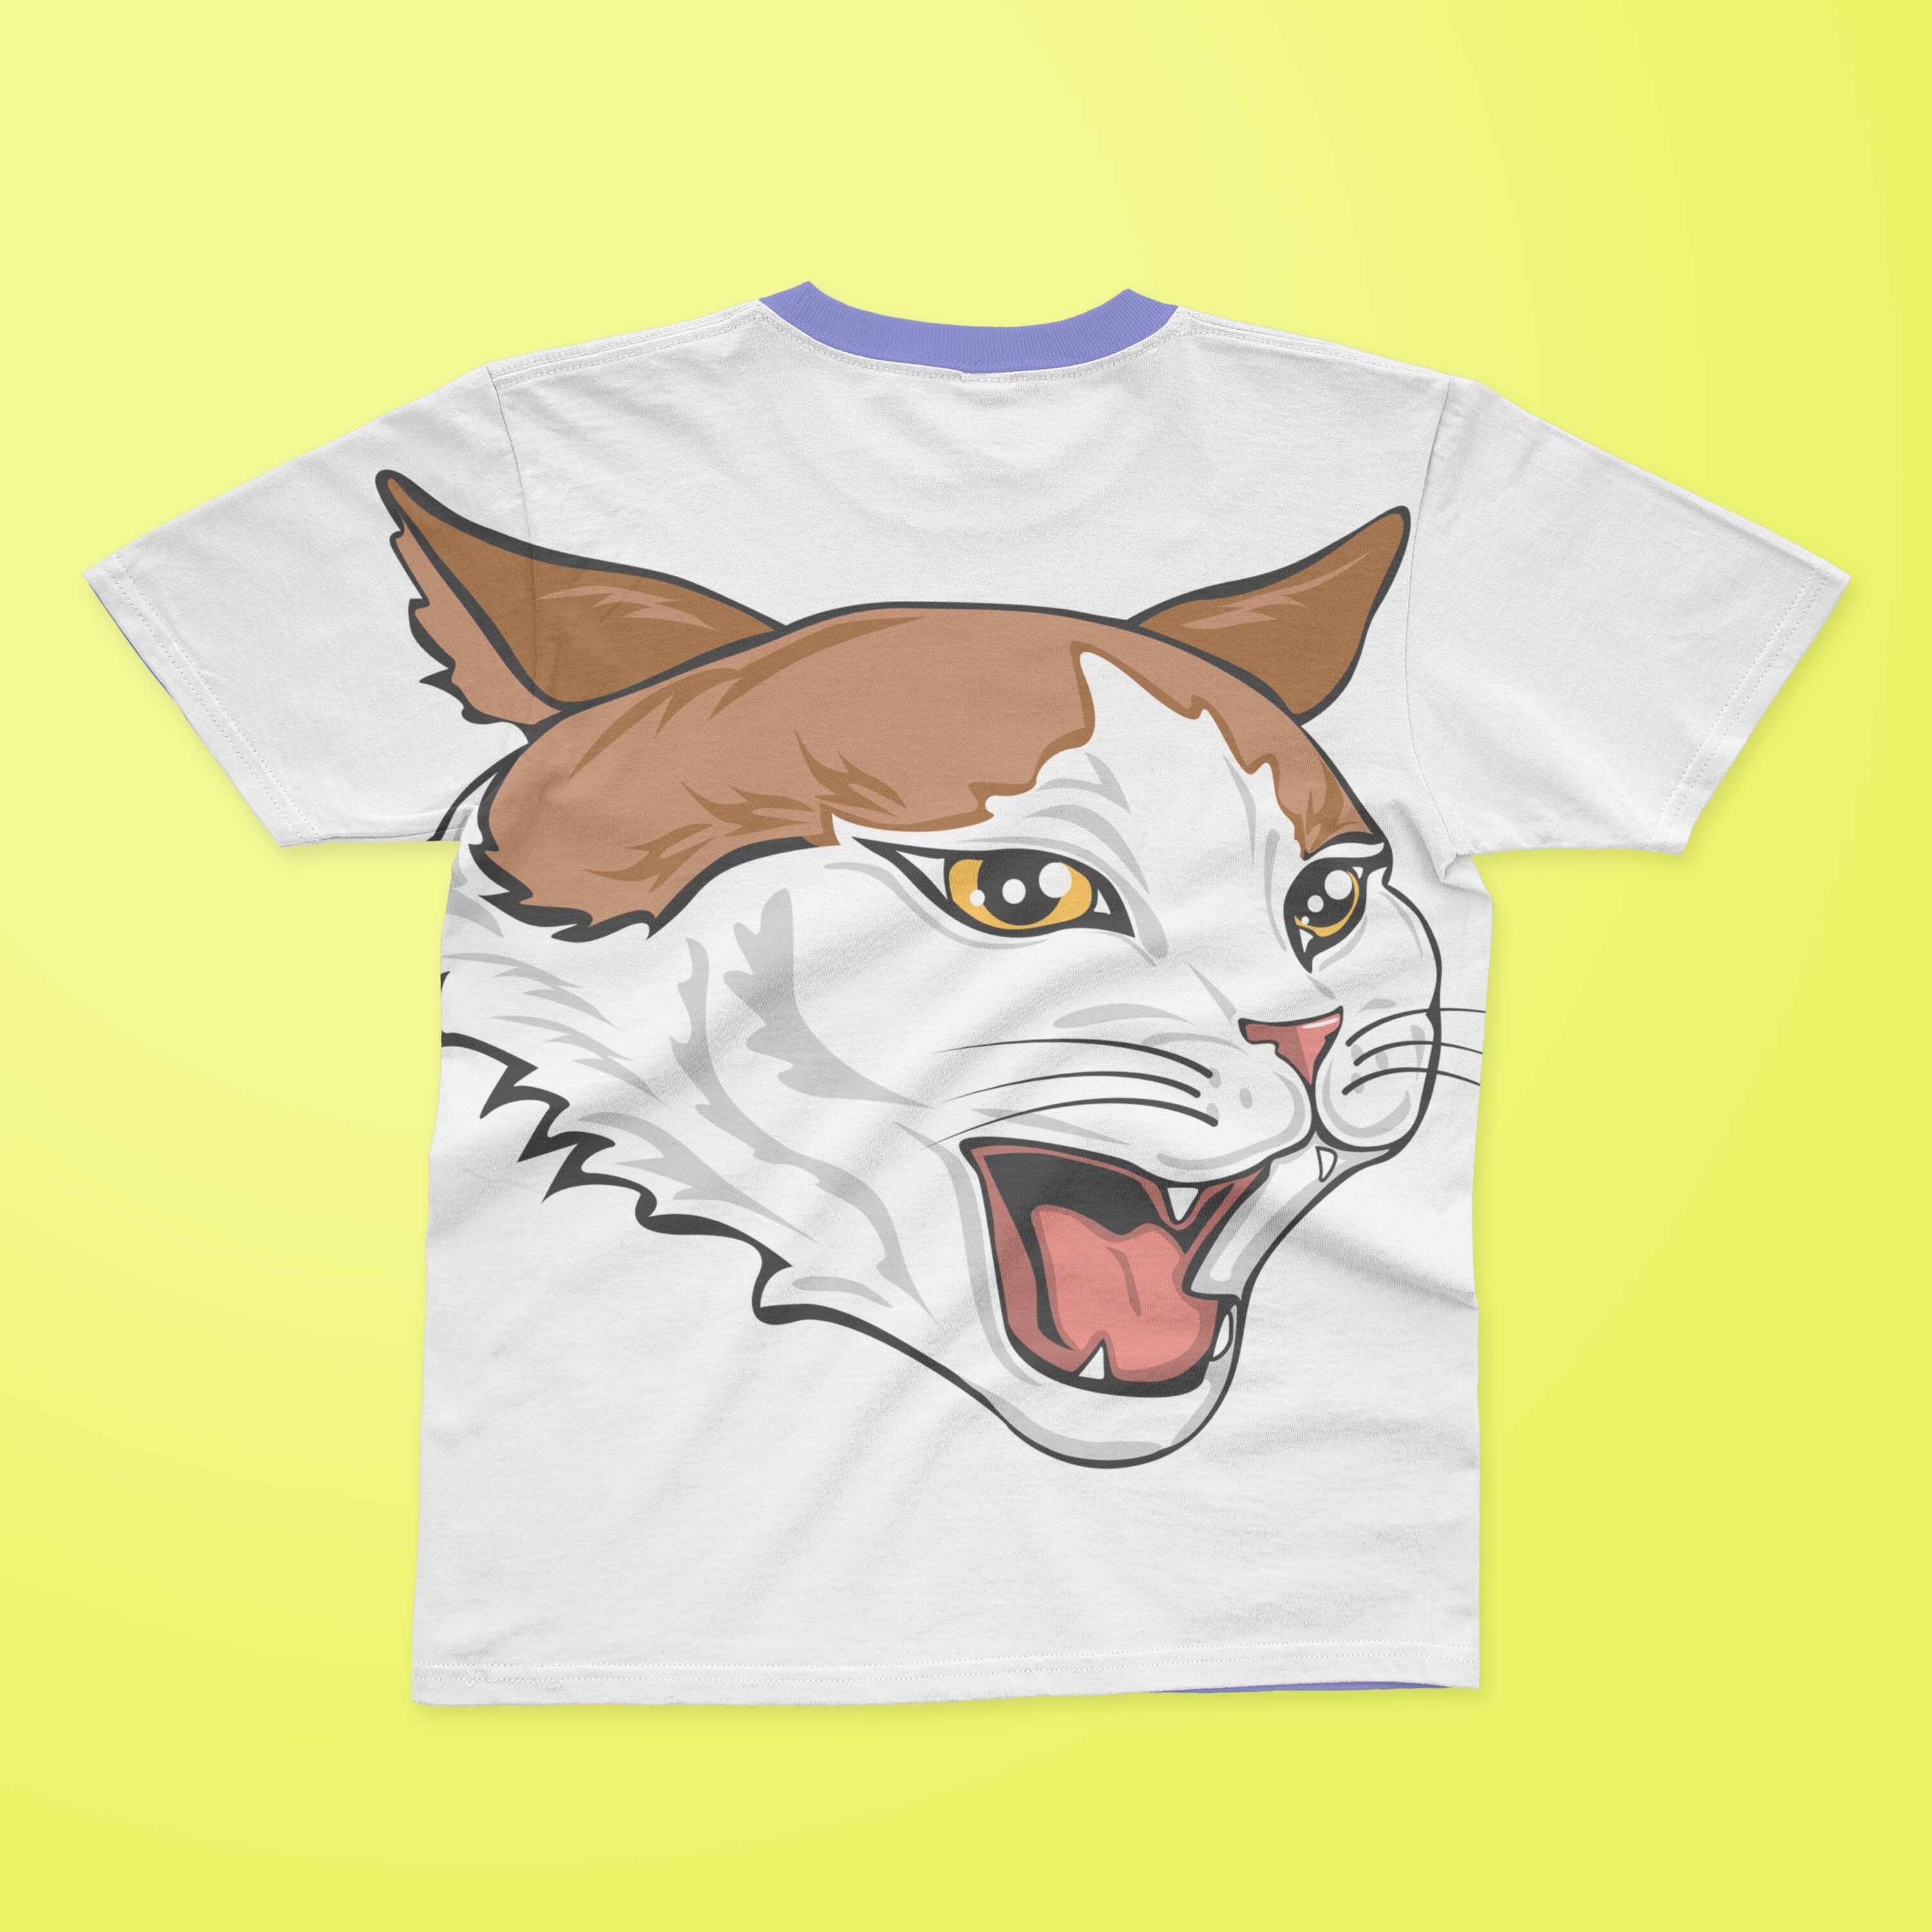 White T-shirt with a purple collar and a face of an angry brown and white cat.